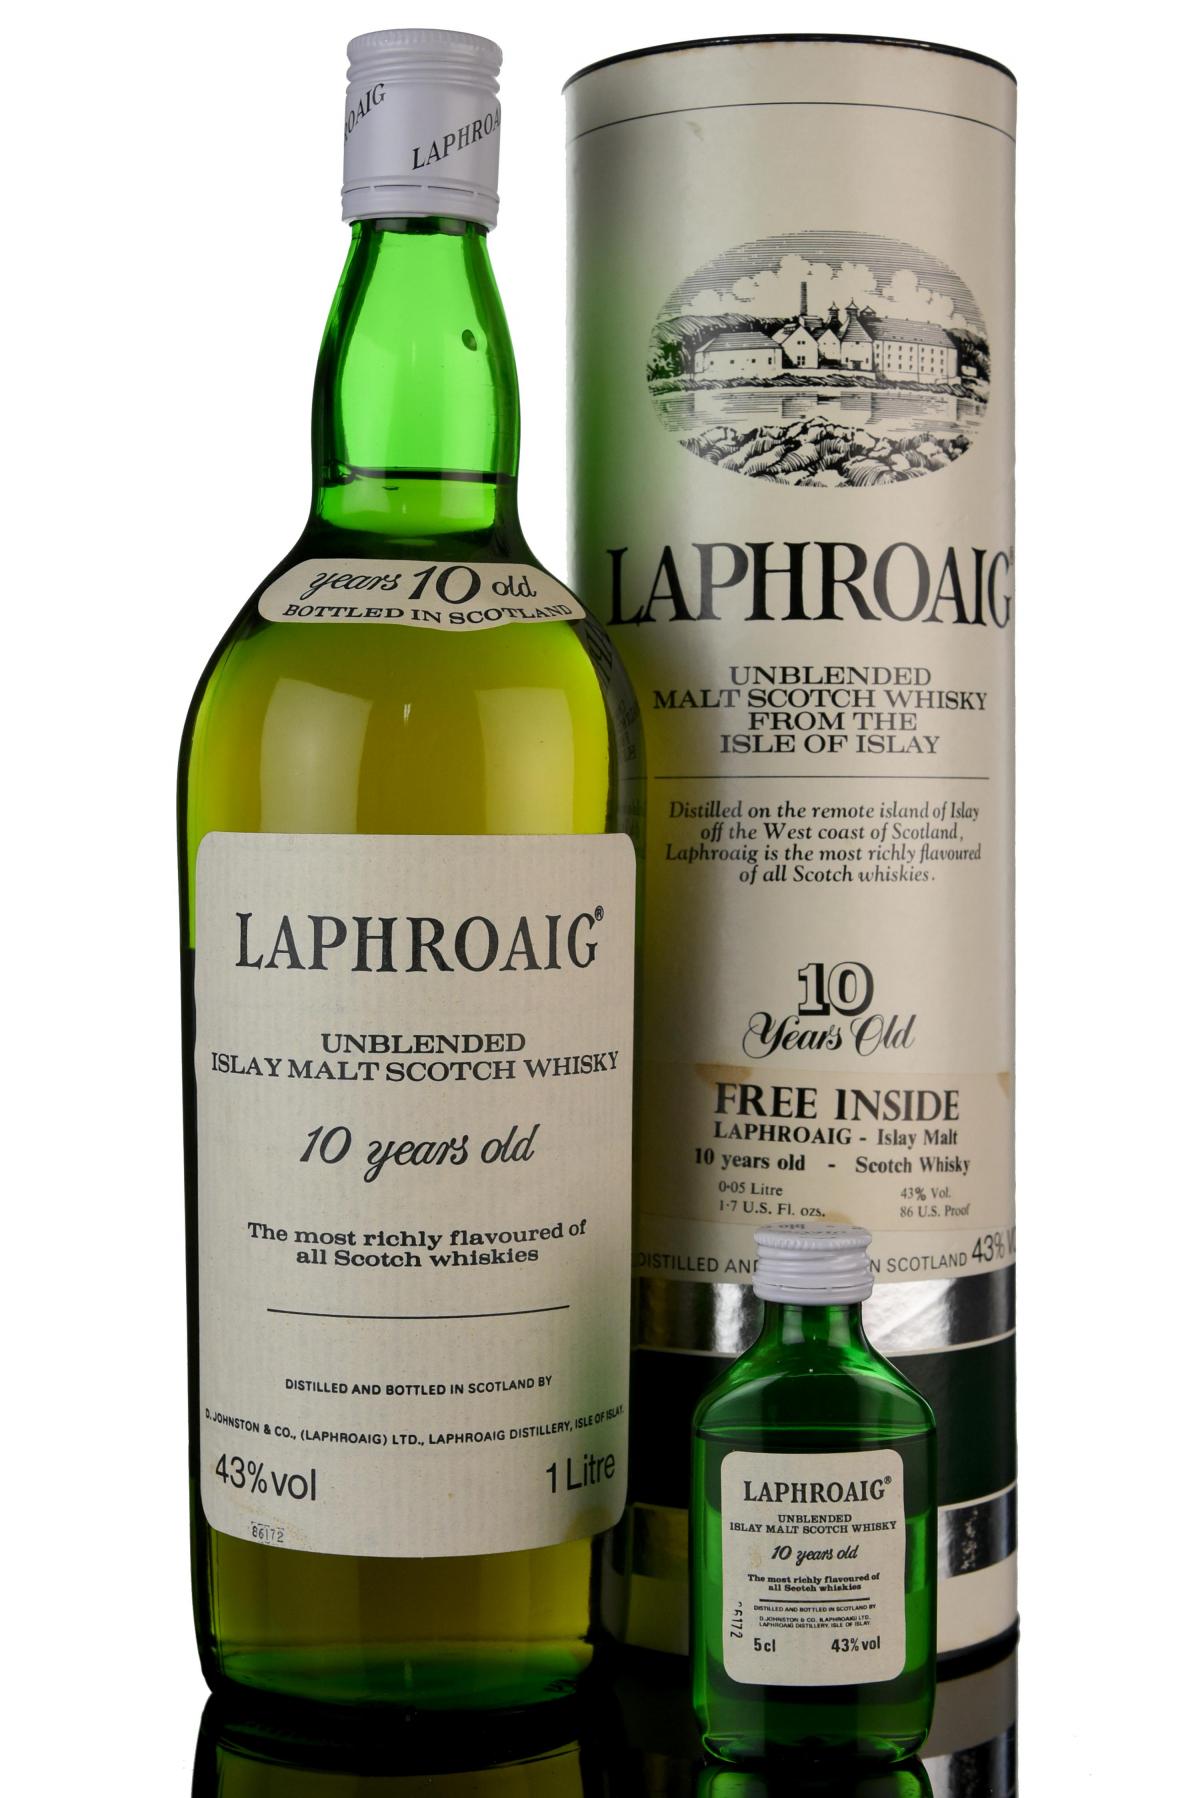 Laphroaig 10 Year Old - 1986 Release - 1 Litre